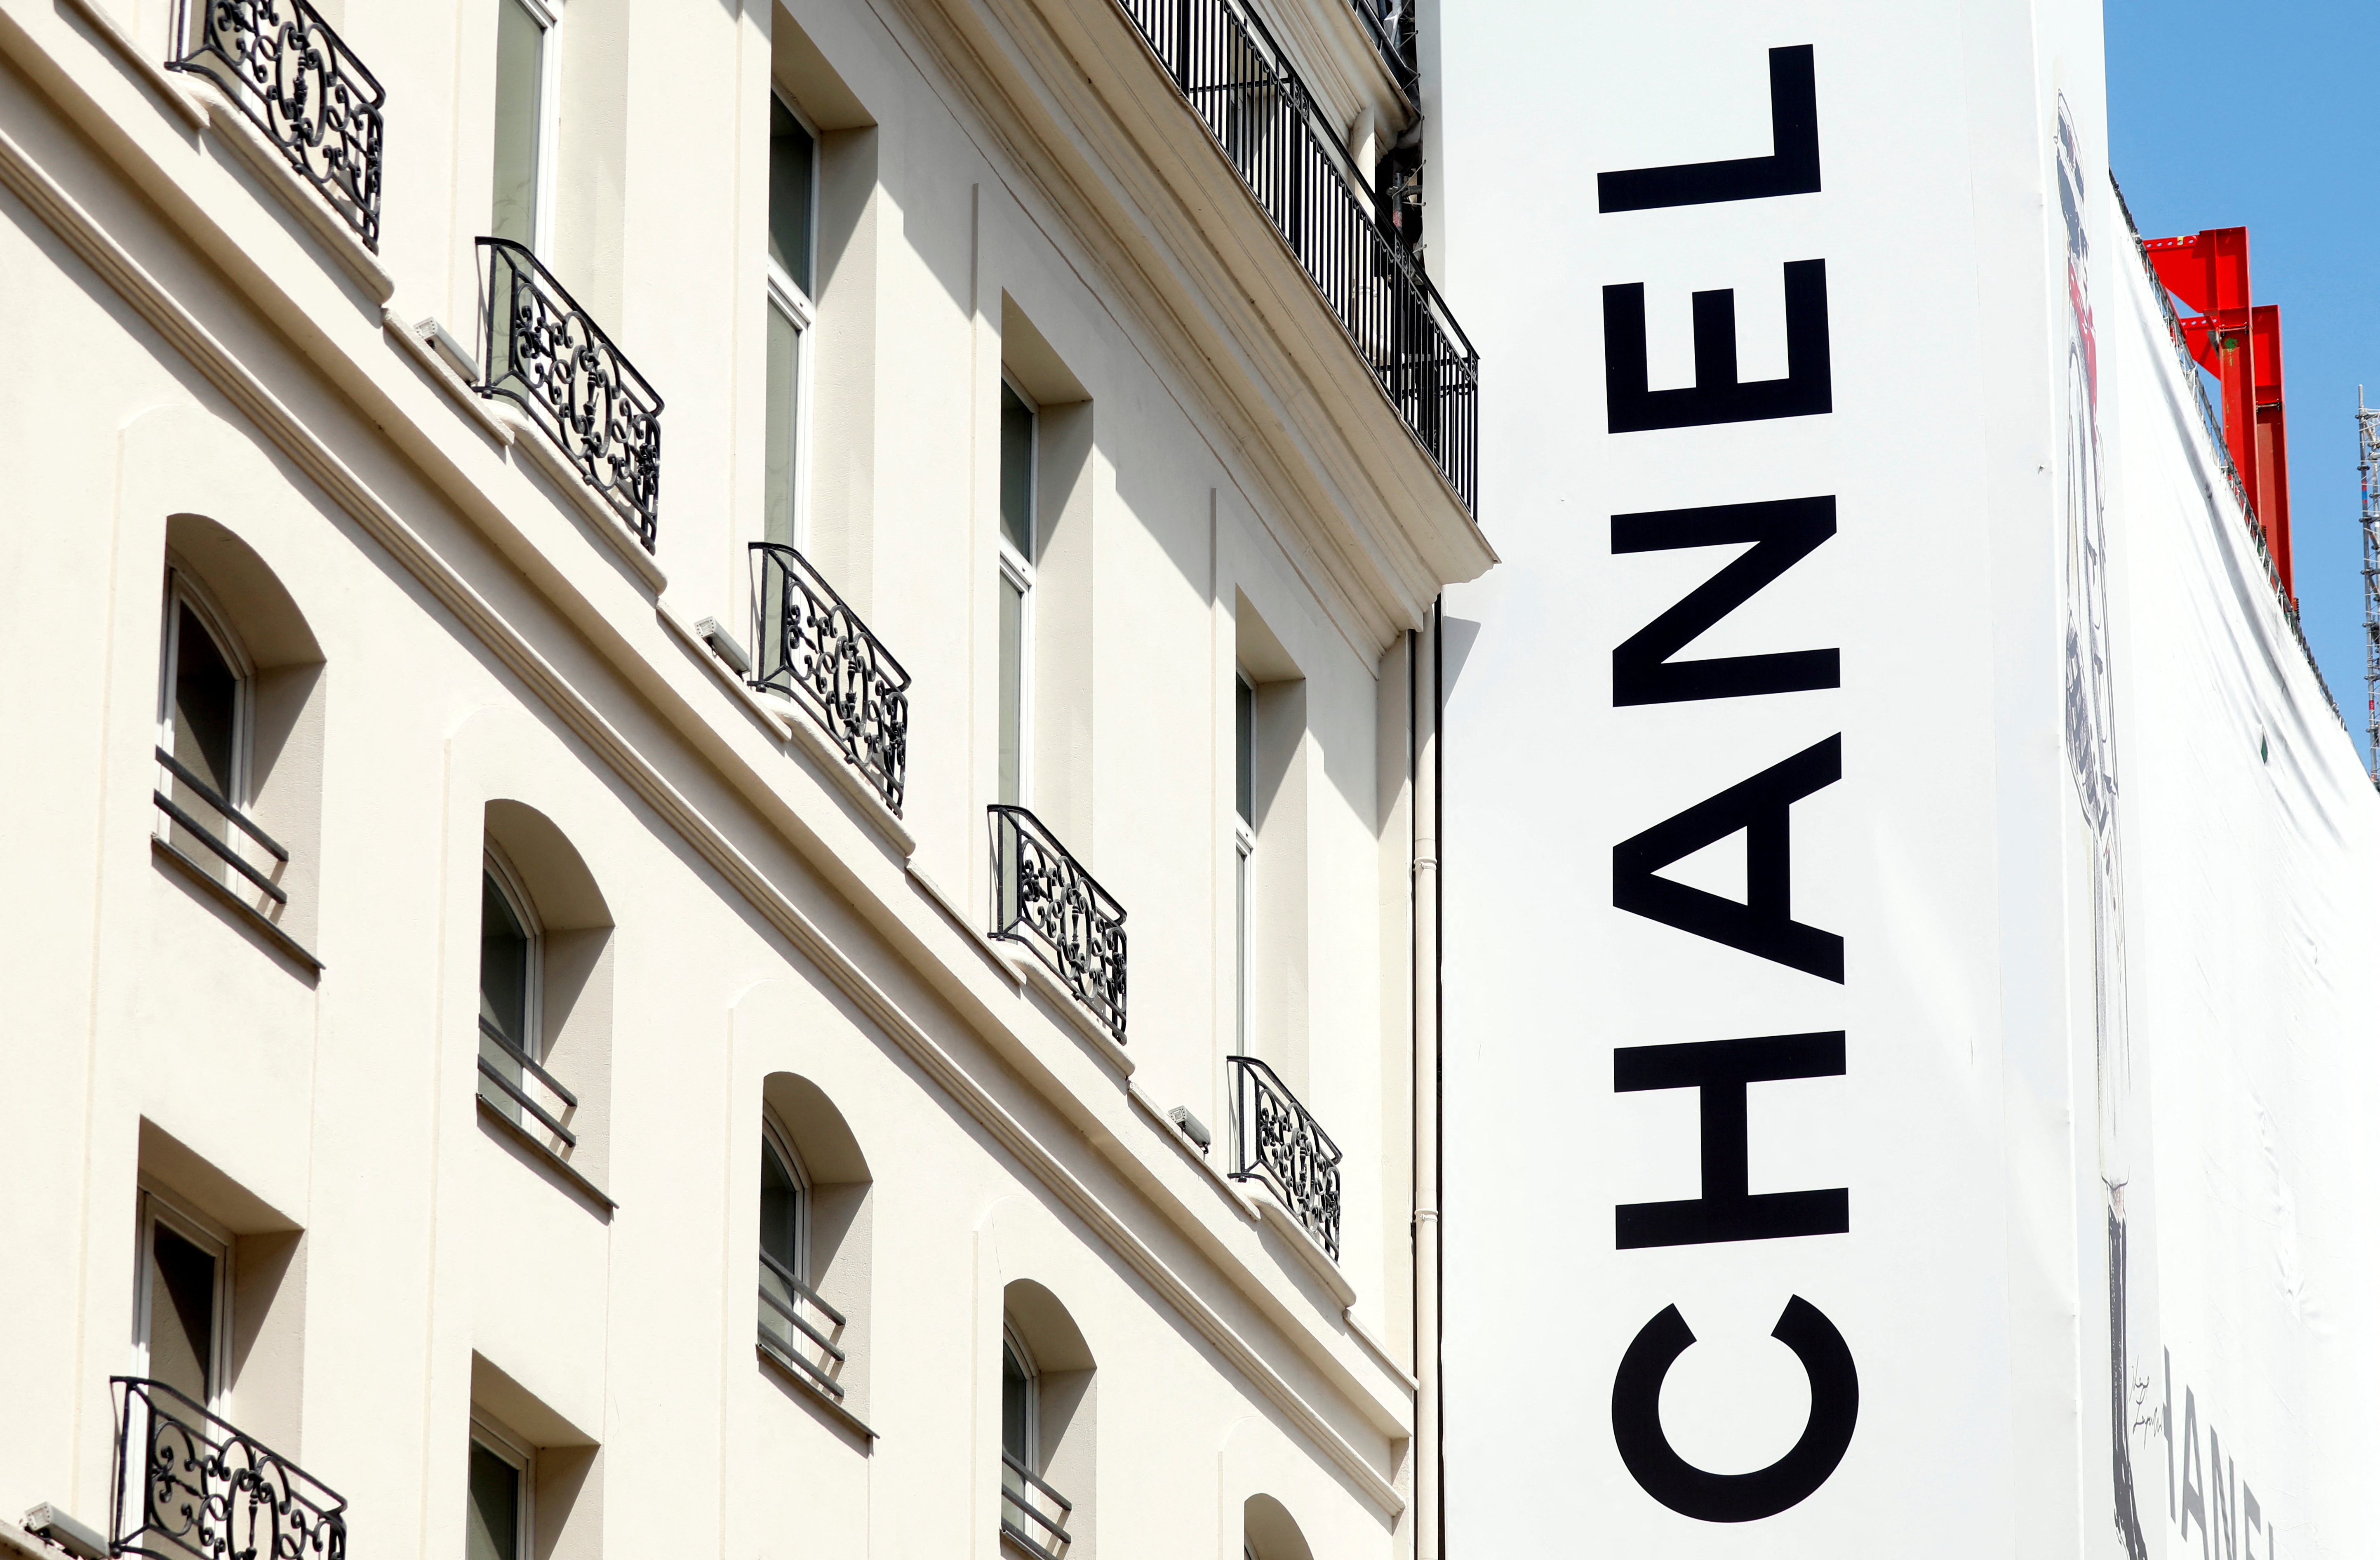 Chanel may limit purchases more in exclusivity drive | Reuters